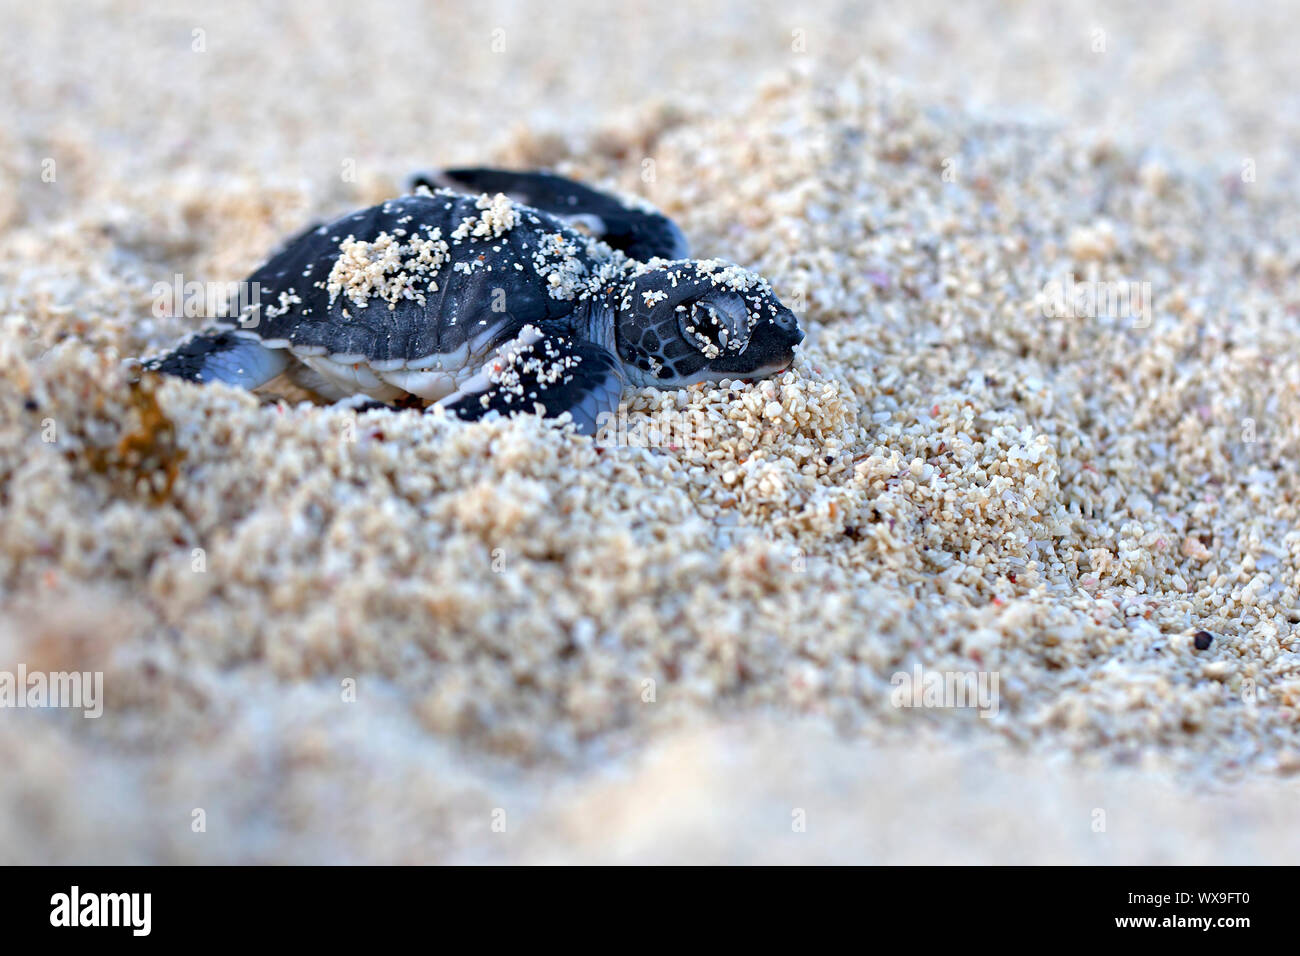 Green Sea Turtle Hatchling Stock Photo